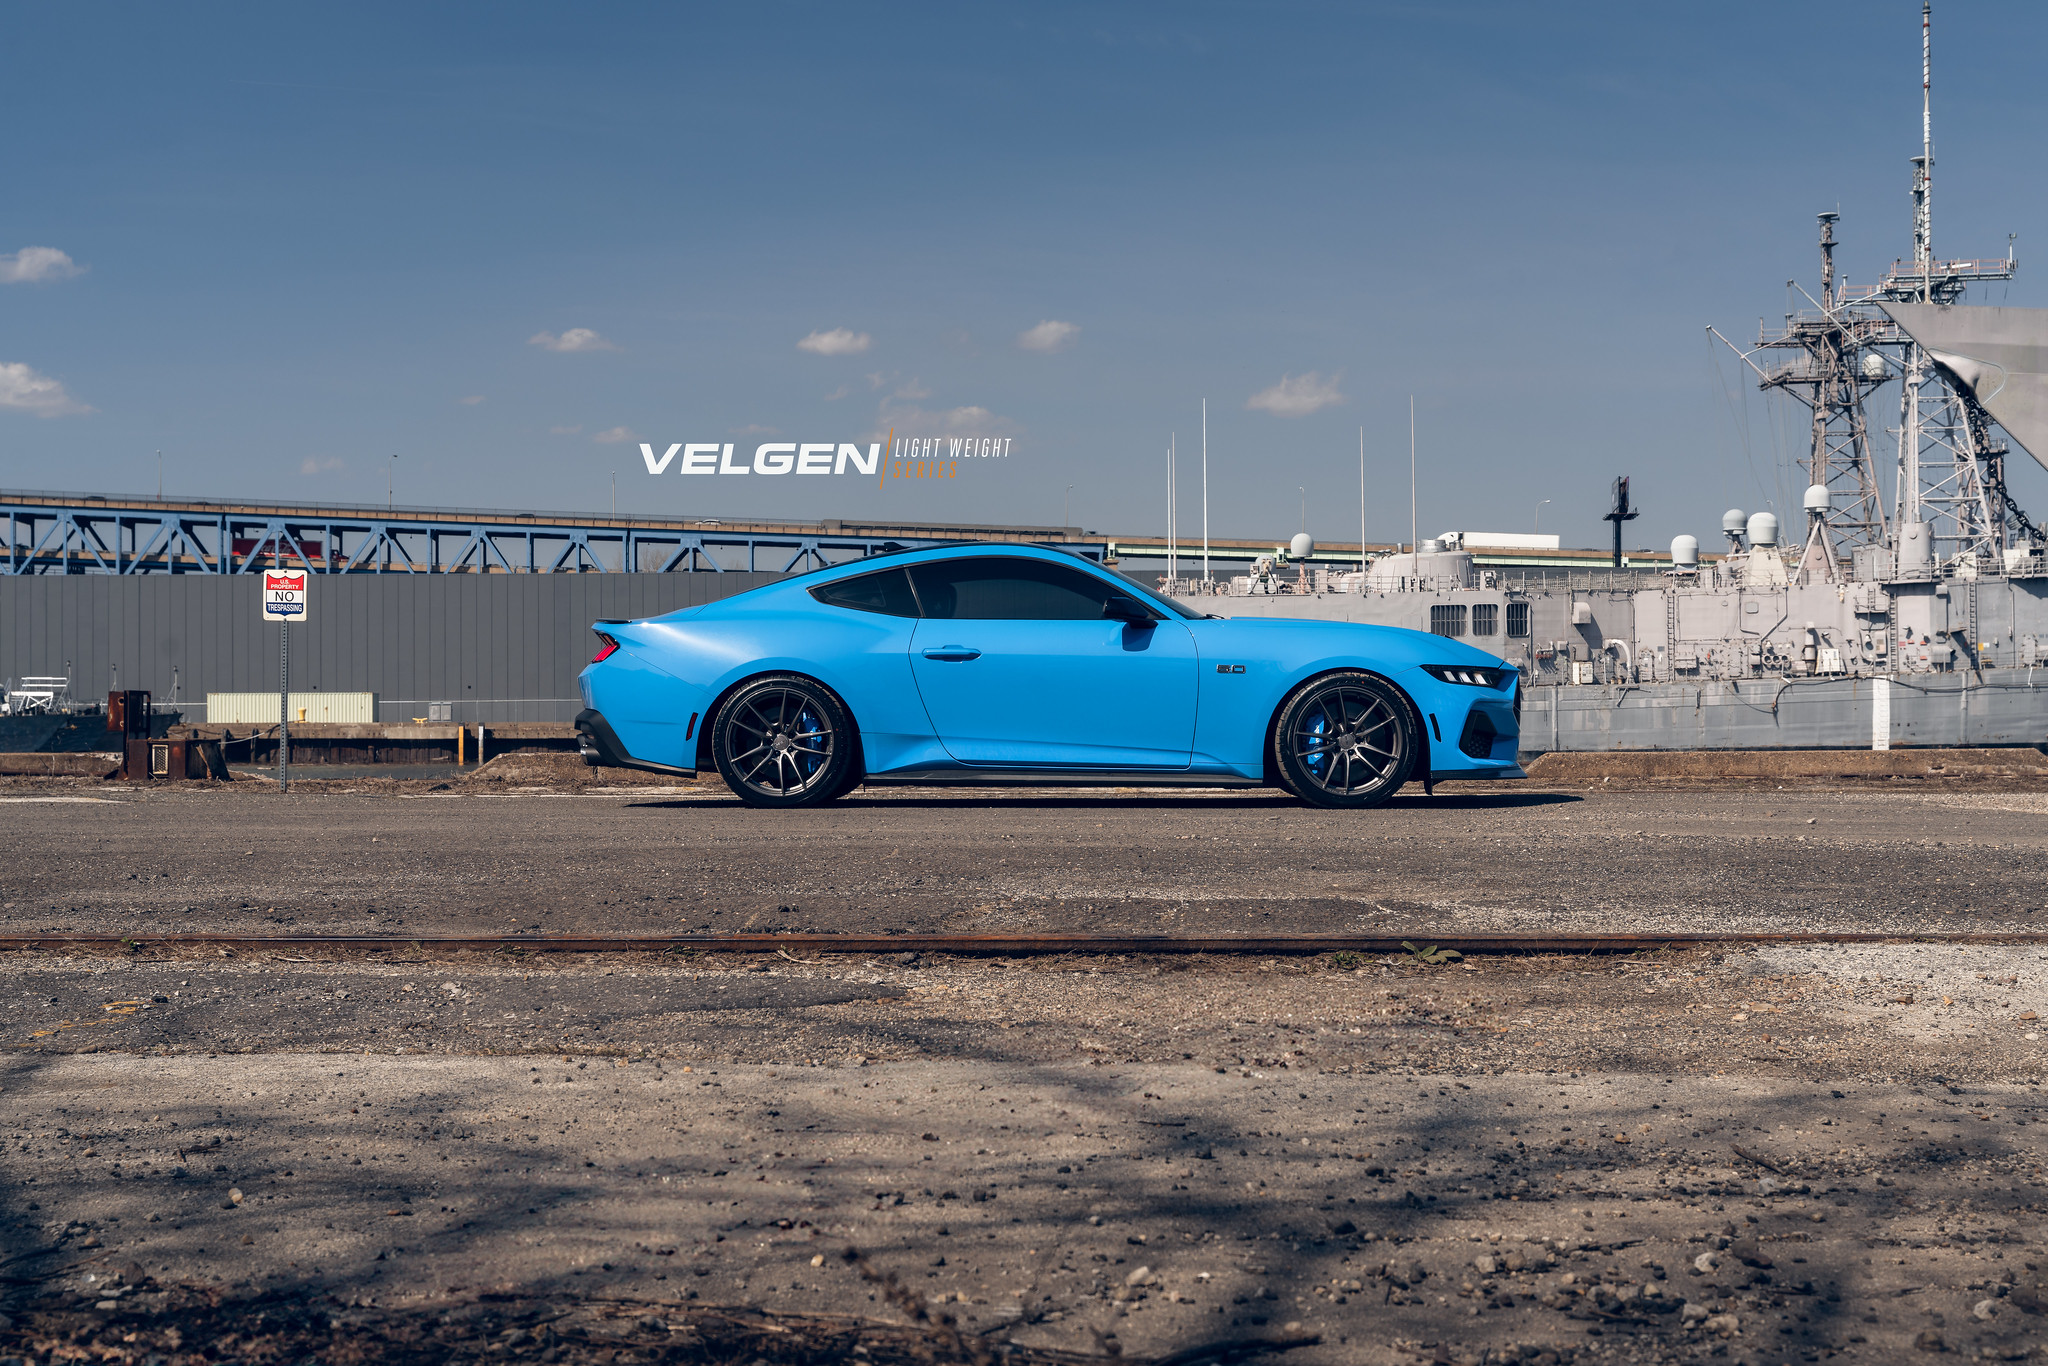 S650 Mustang 19" 20" Velgen Flow Forged Concave Wheels Mustang S650 - Vibe Motorsports Official Thread 53602411110_3bdeadbcf1_k